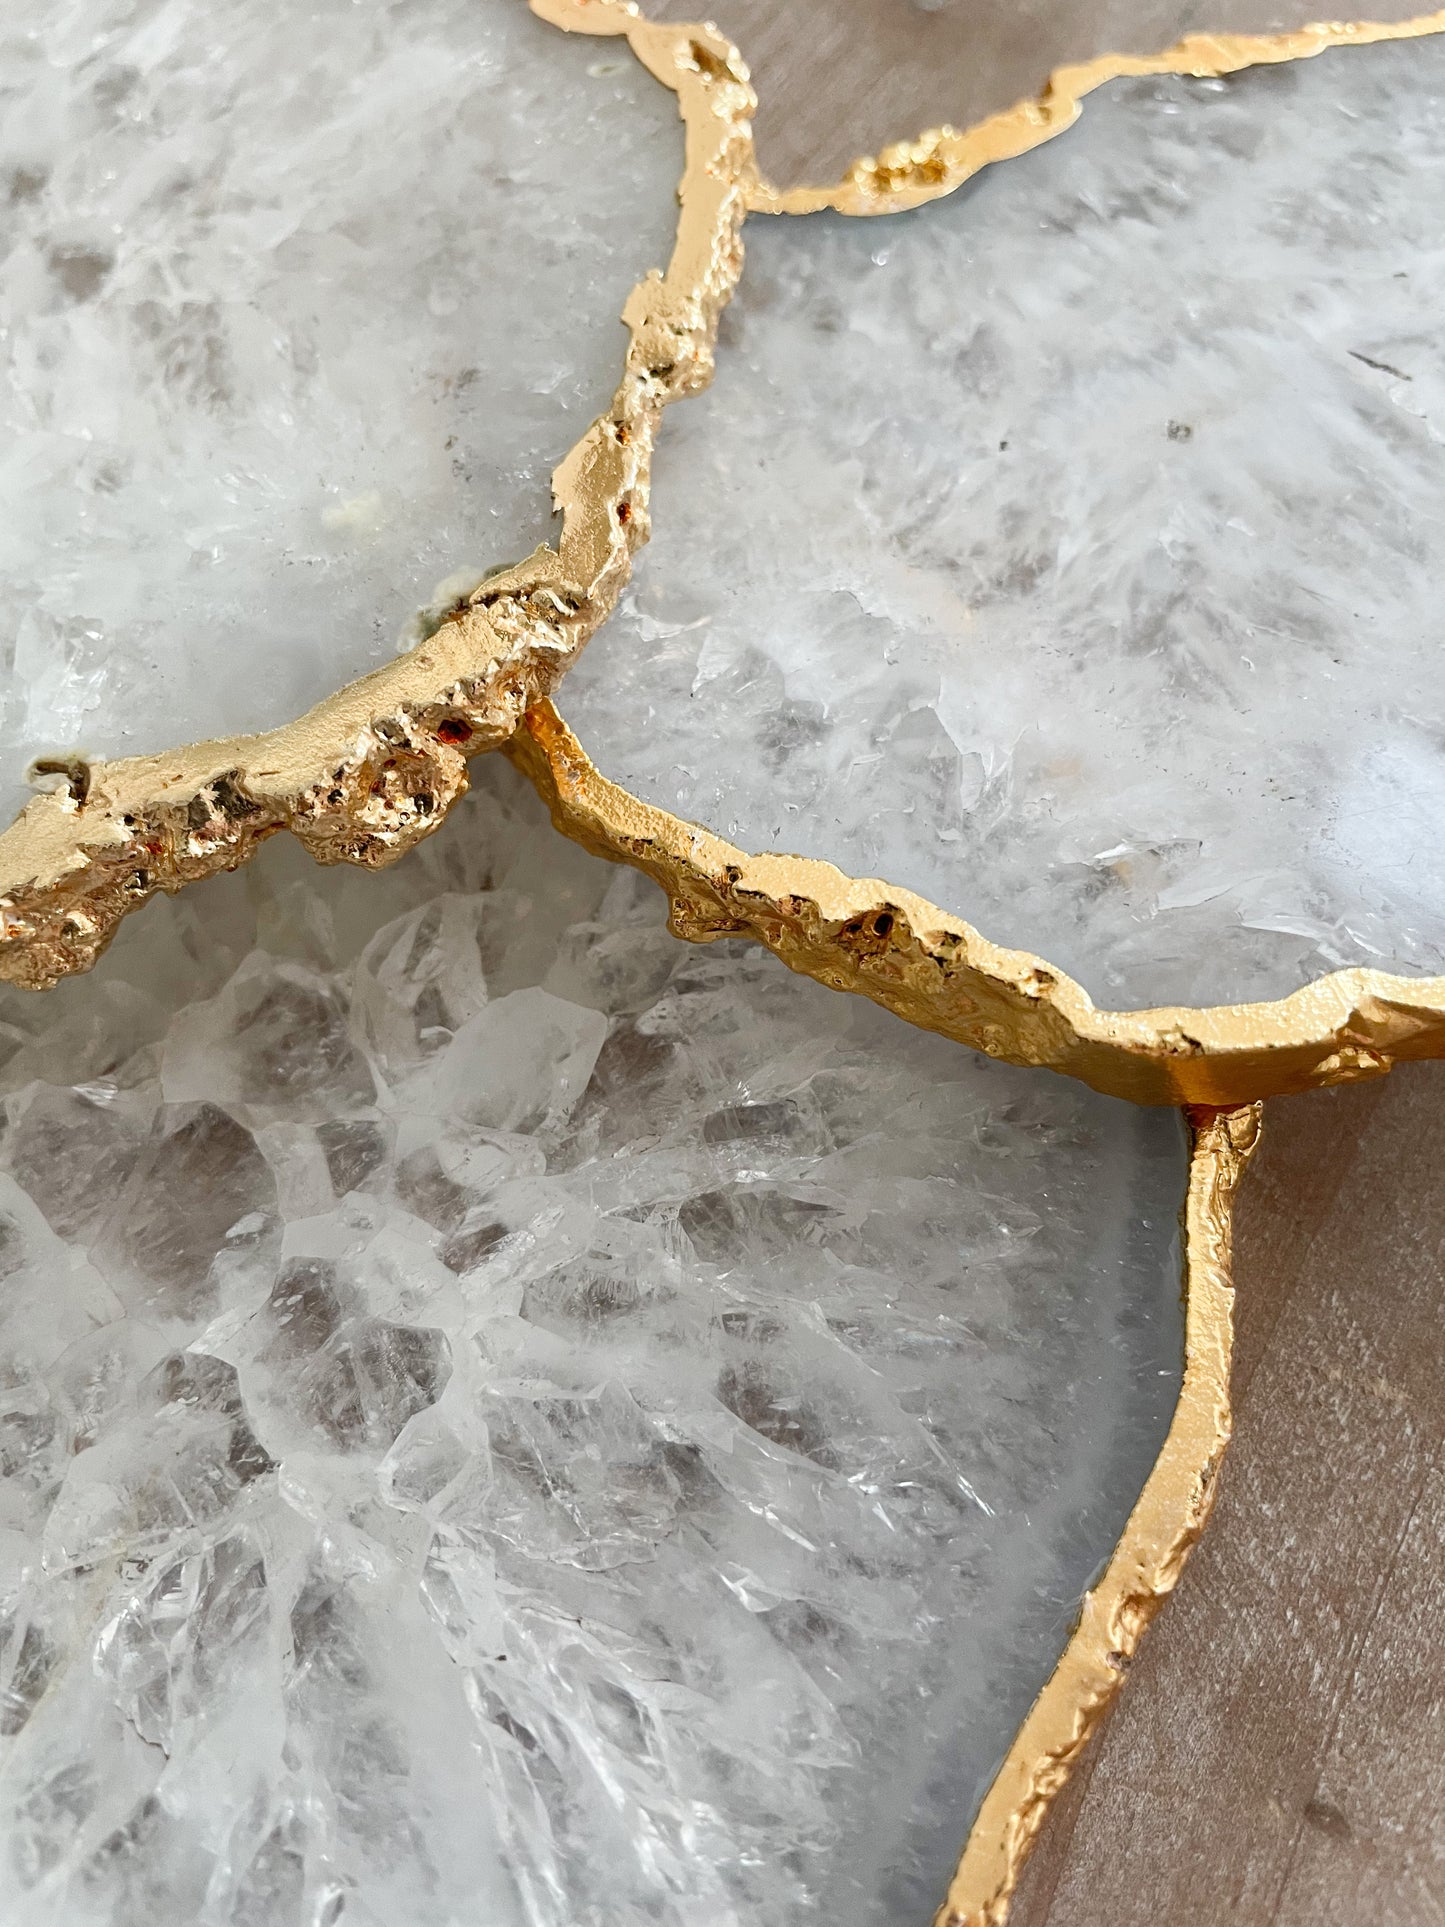 Crystal Agate Stone Coasters with Gold Edge